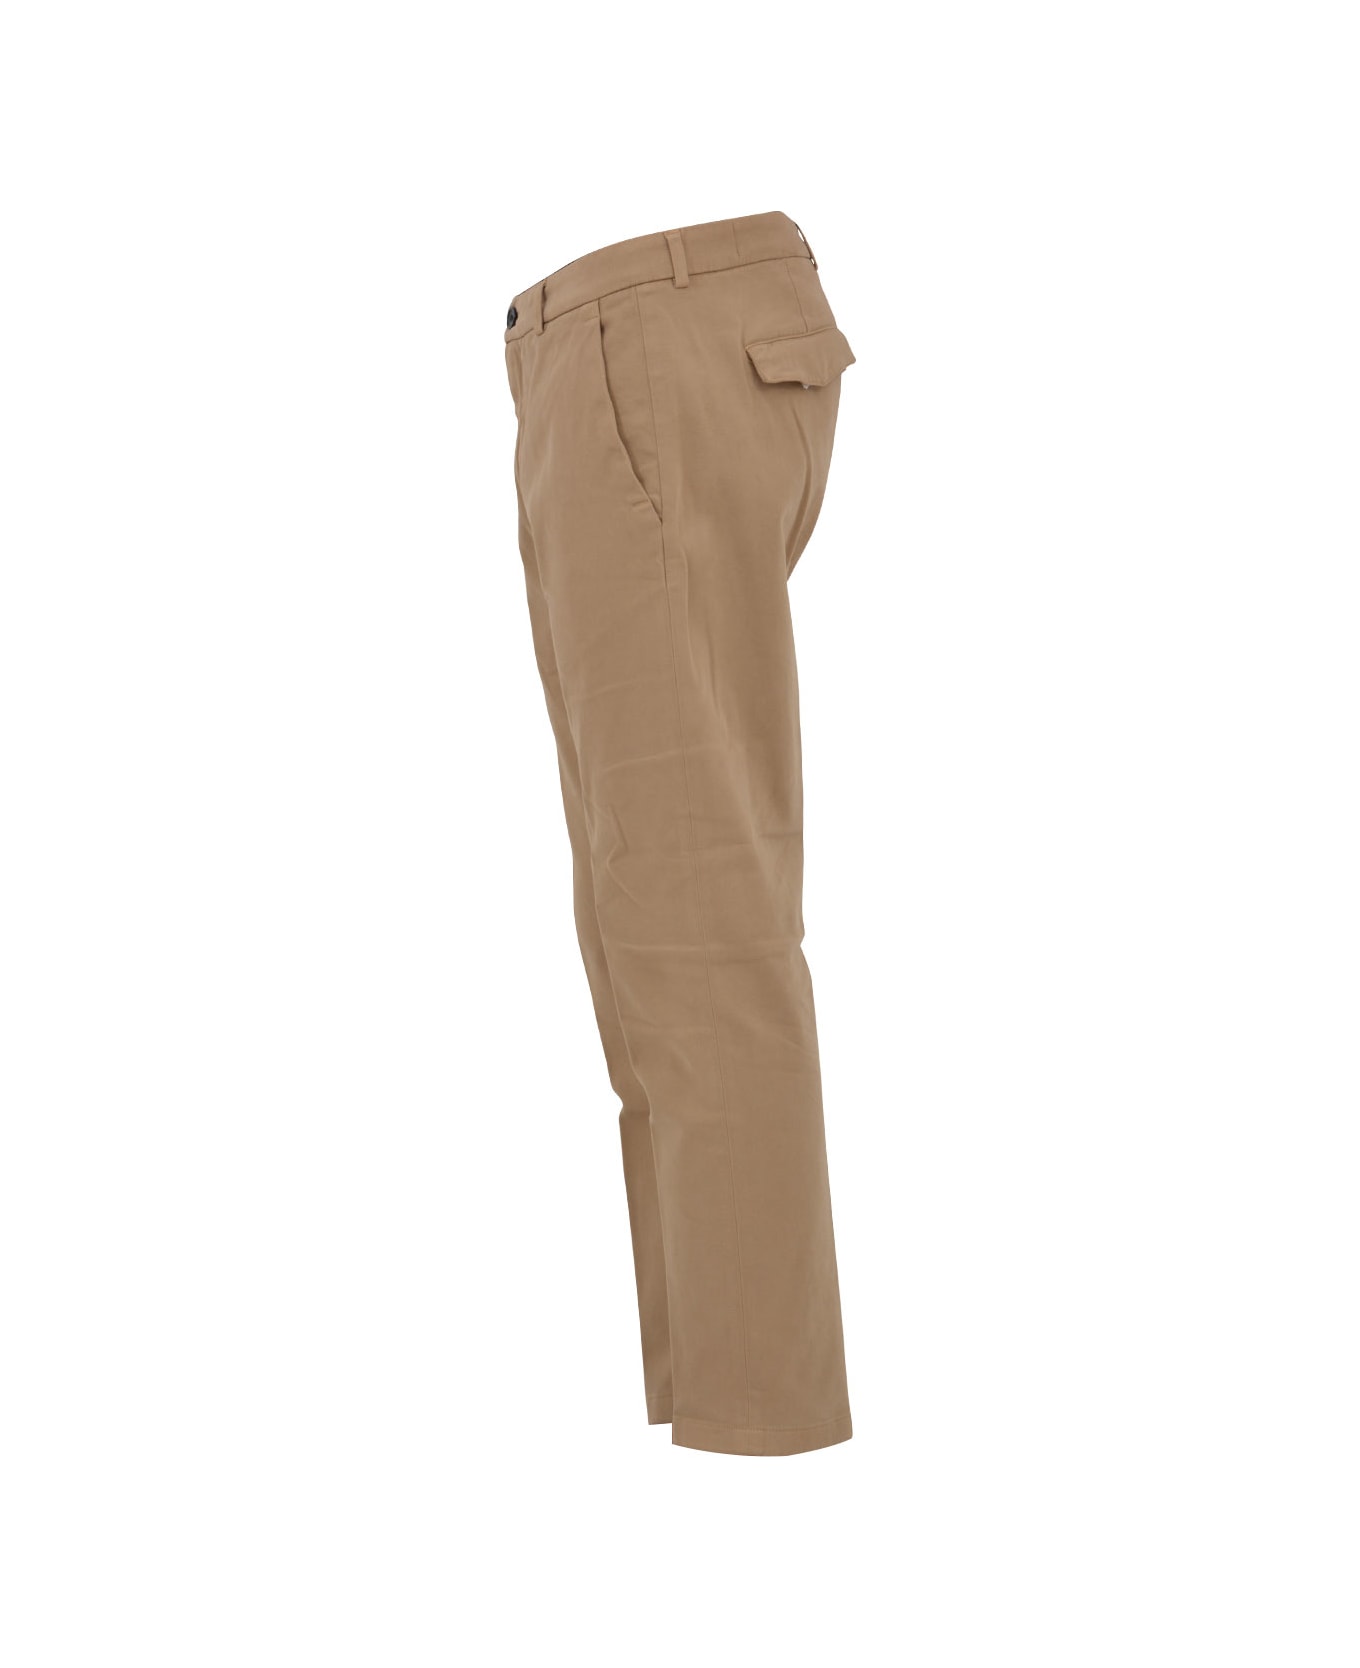 Department Five Chino Trousers - BEIGE